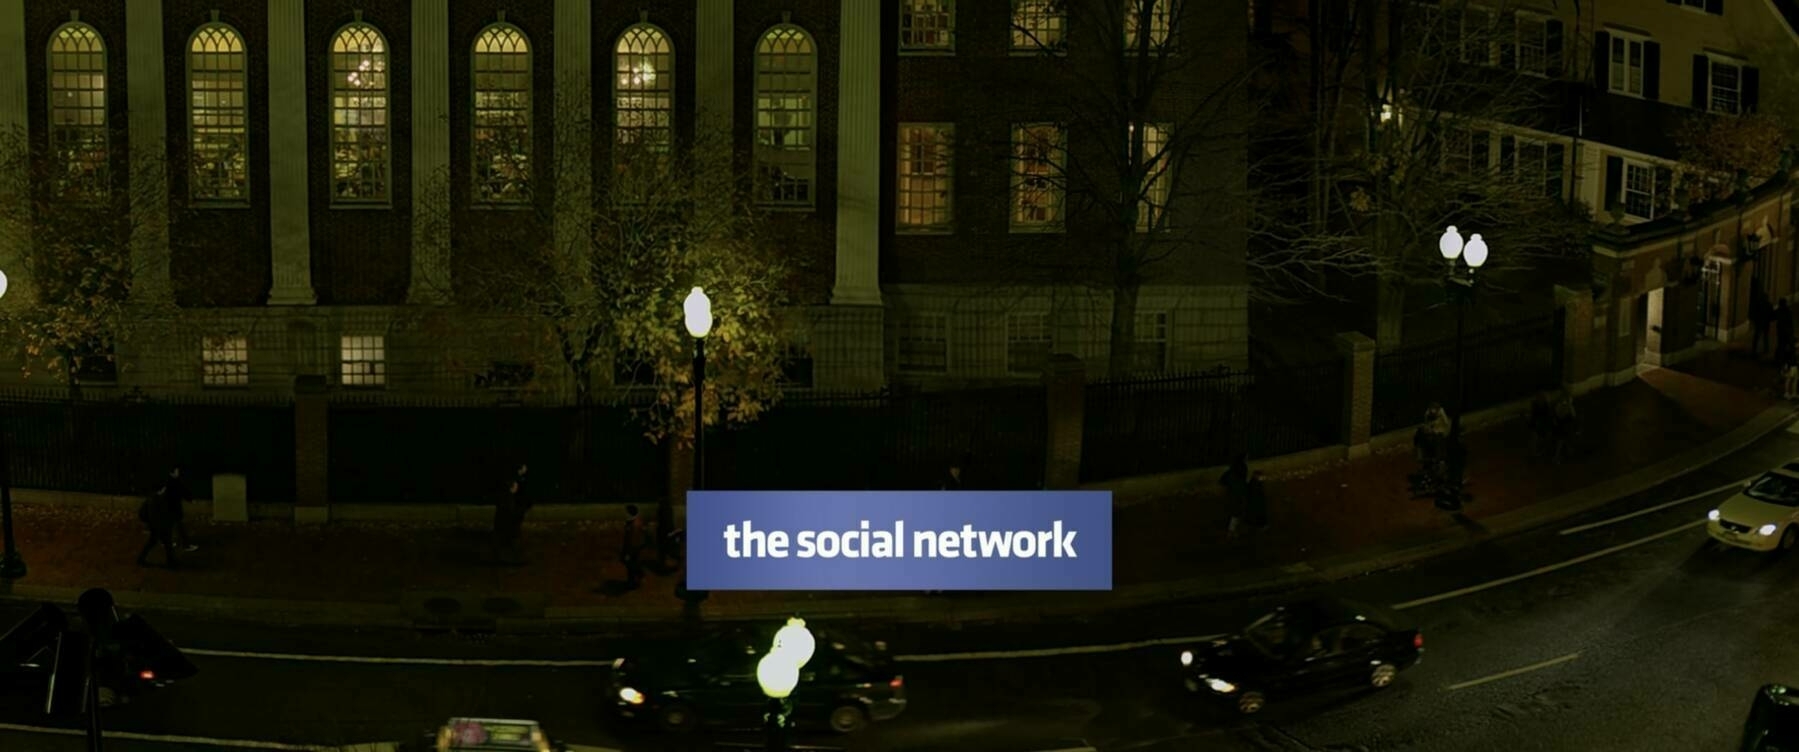 The title card for the film, The Social Network.